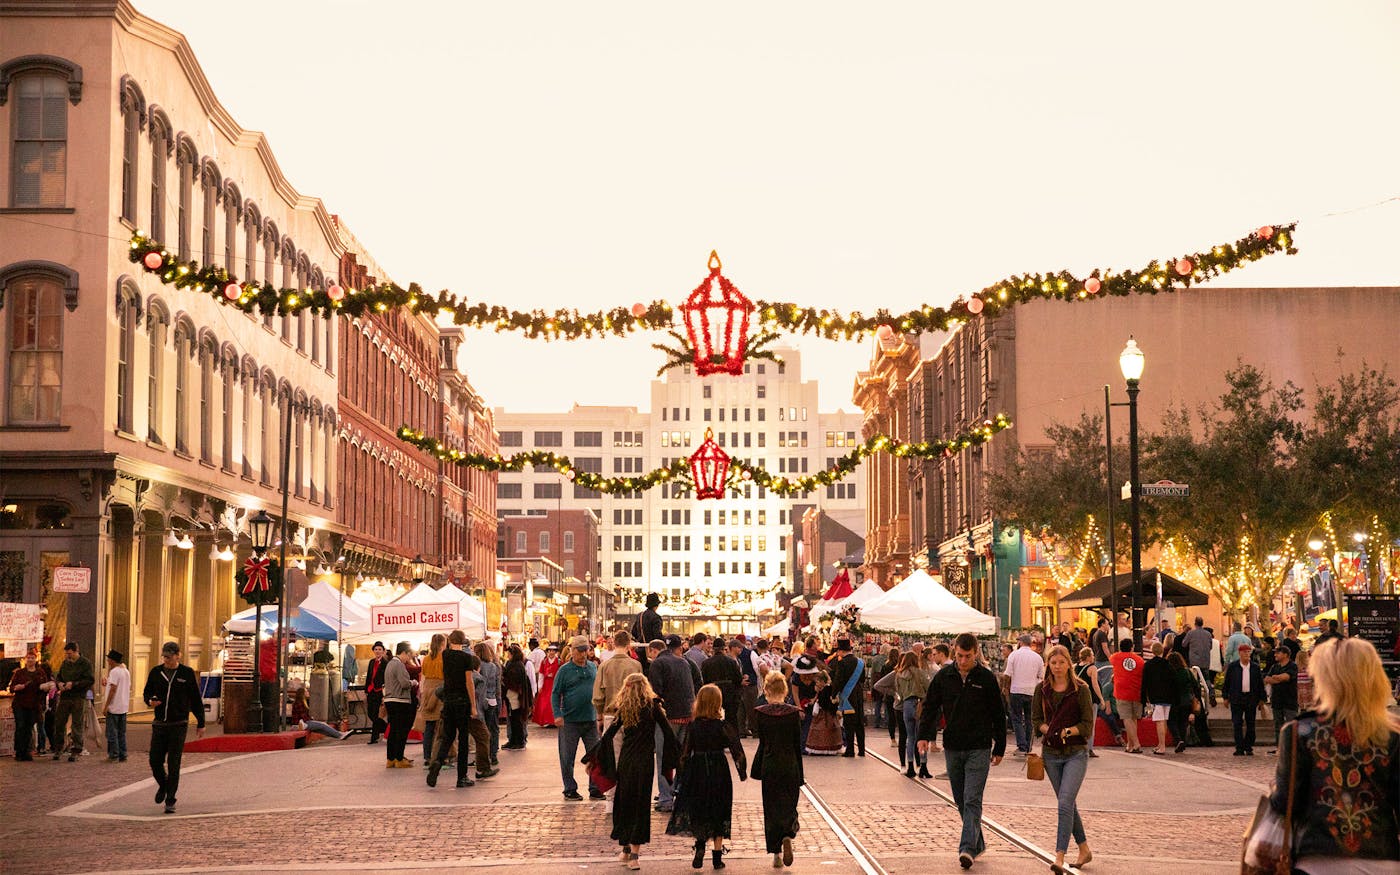 https://img.texasmonthly.com/2022/11/dickens-on-strand-christmas-market.jpg?auto=compress&crop=faces&fit=crop&fm=jpg&h=1050&ixlib=php-3.3.1&q=45&w=1400